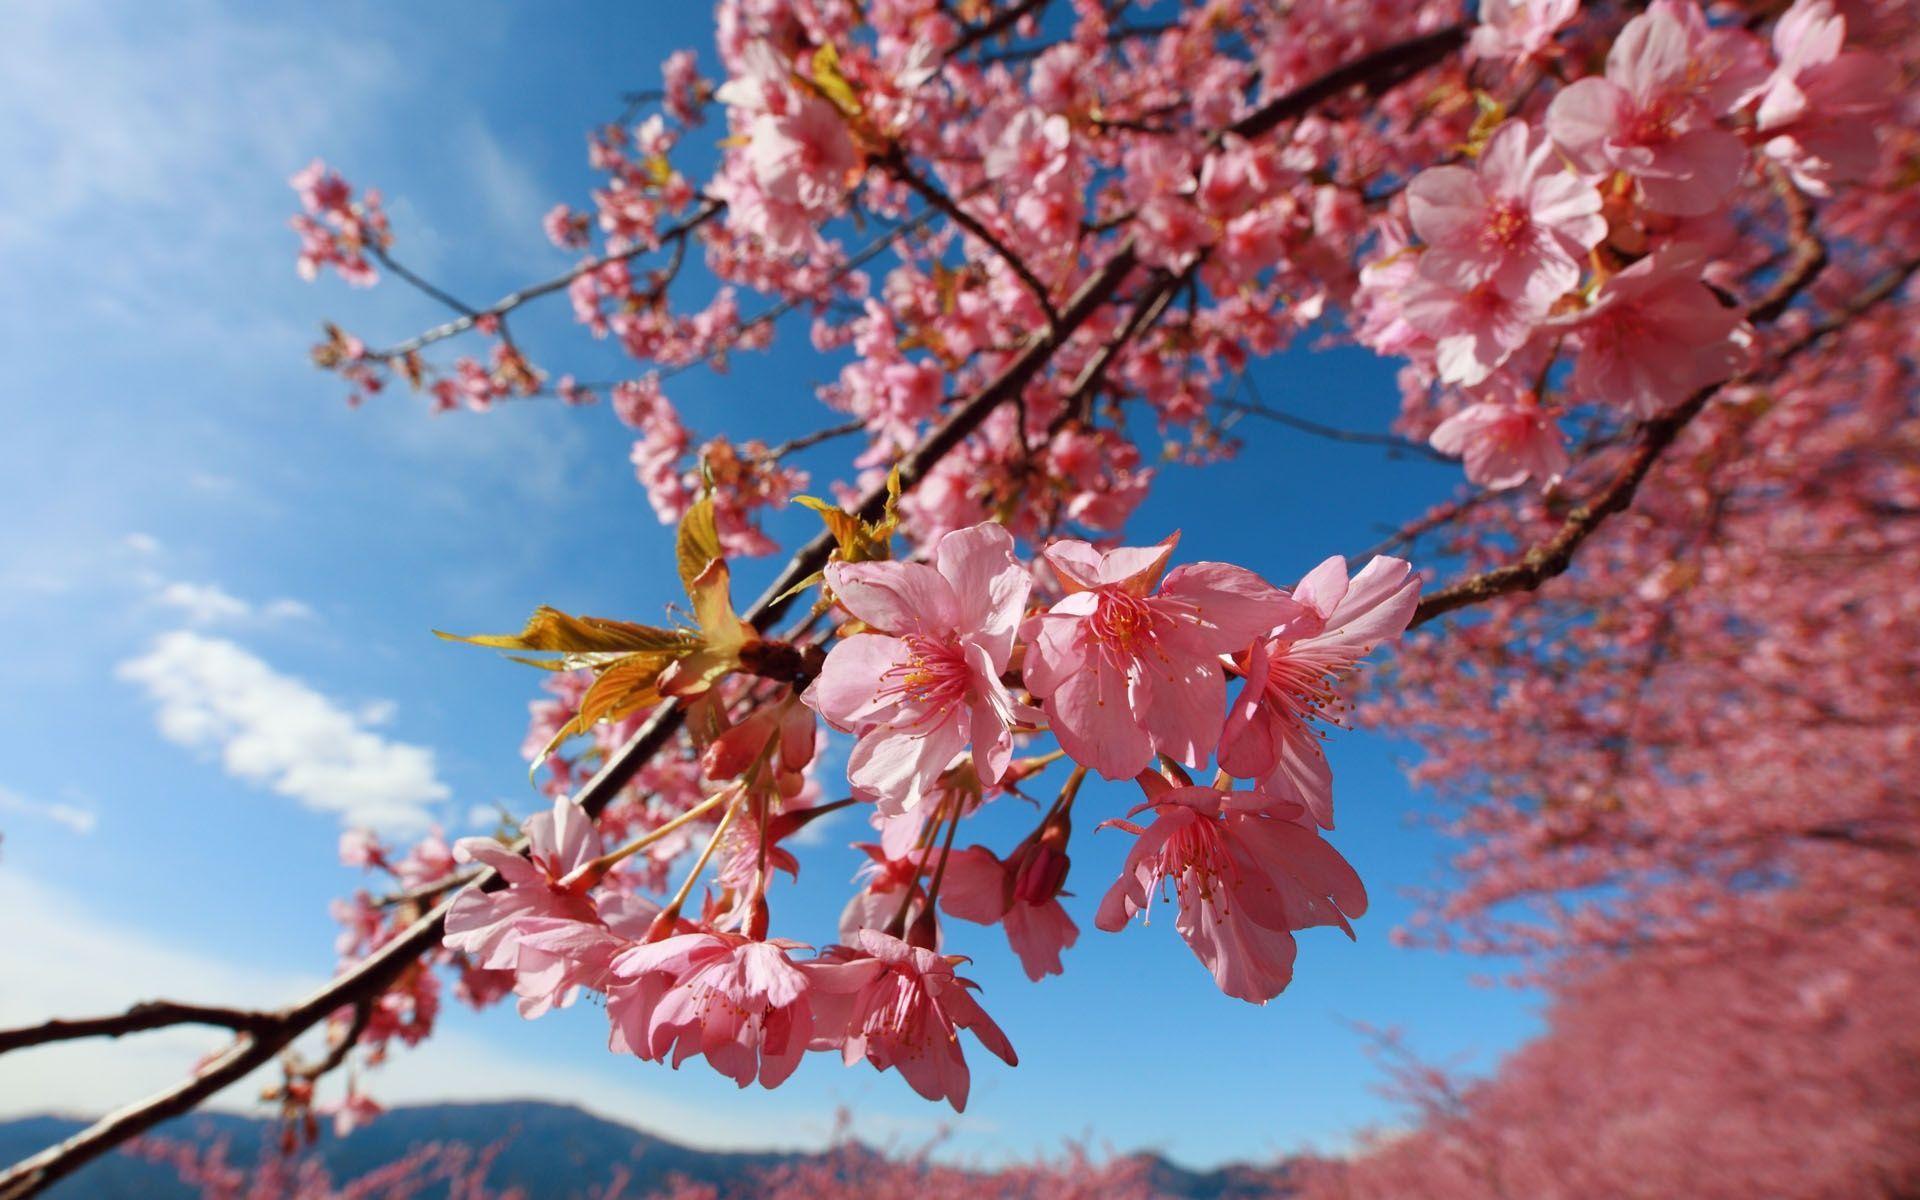 Cherry Blossom Festival Wallpapers - Top Free Cherry Blossom Festival